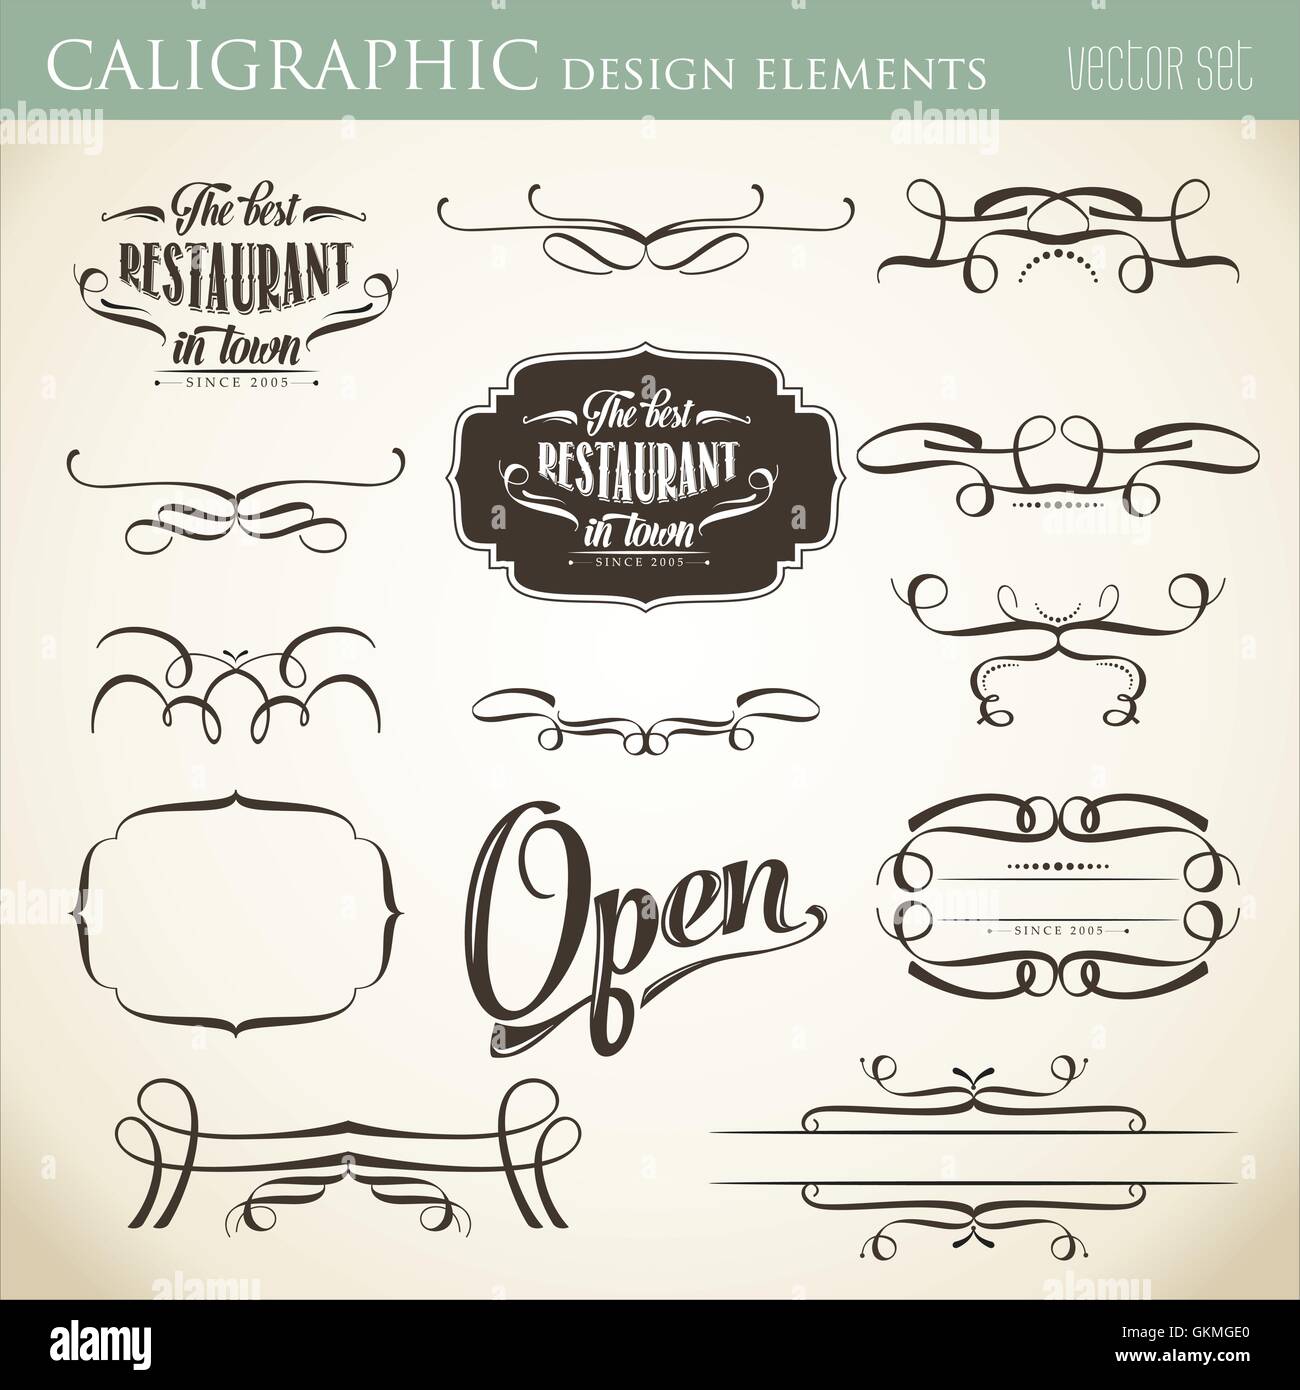 calligraphic design elements to embellish your layout Stock Vector